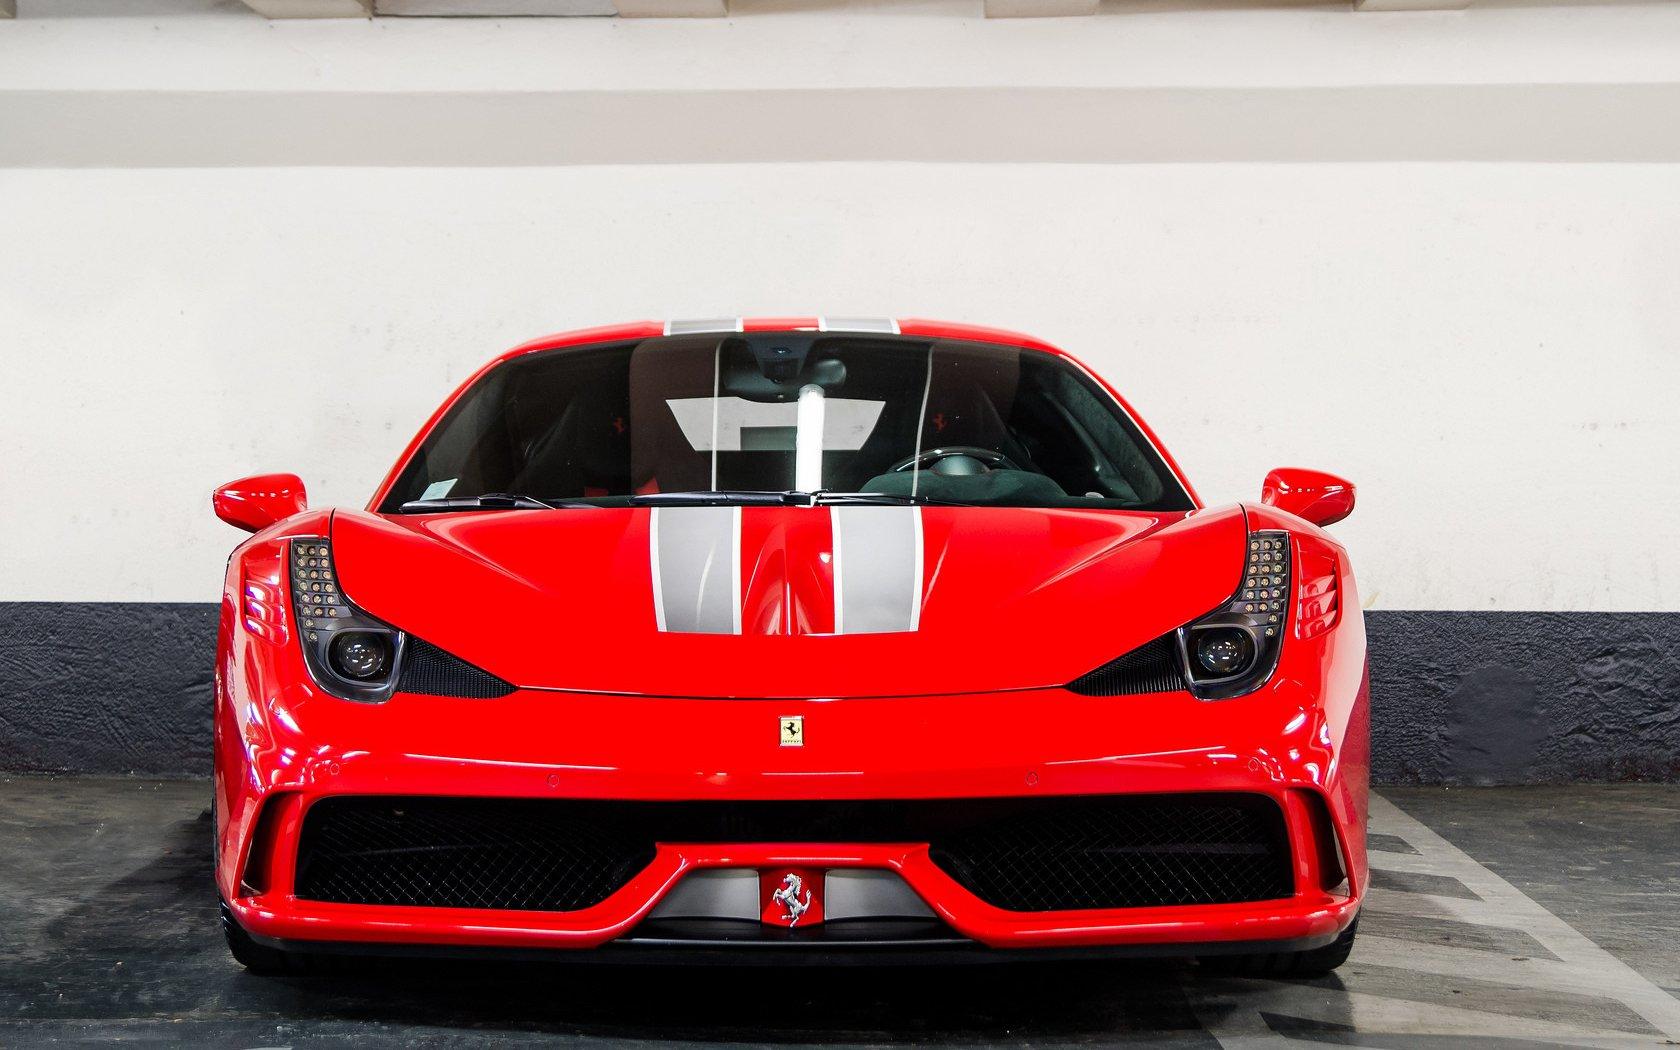 Ferrari 458 Speciale Wallpapers and Backgrounds Image